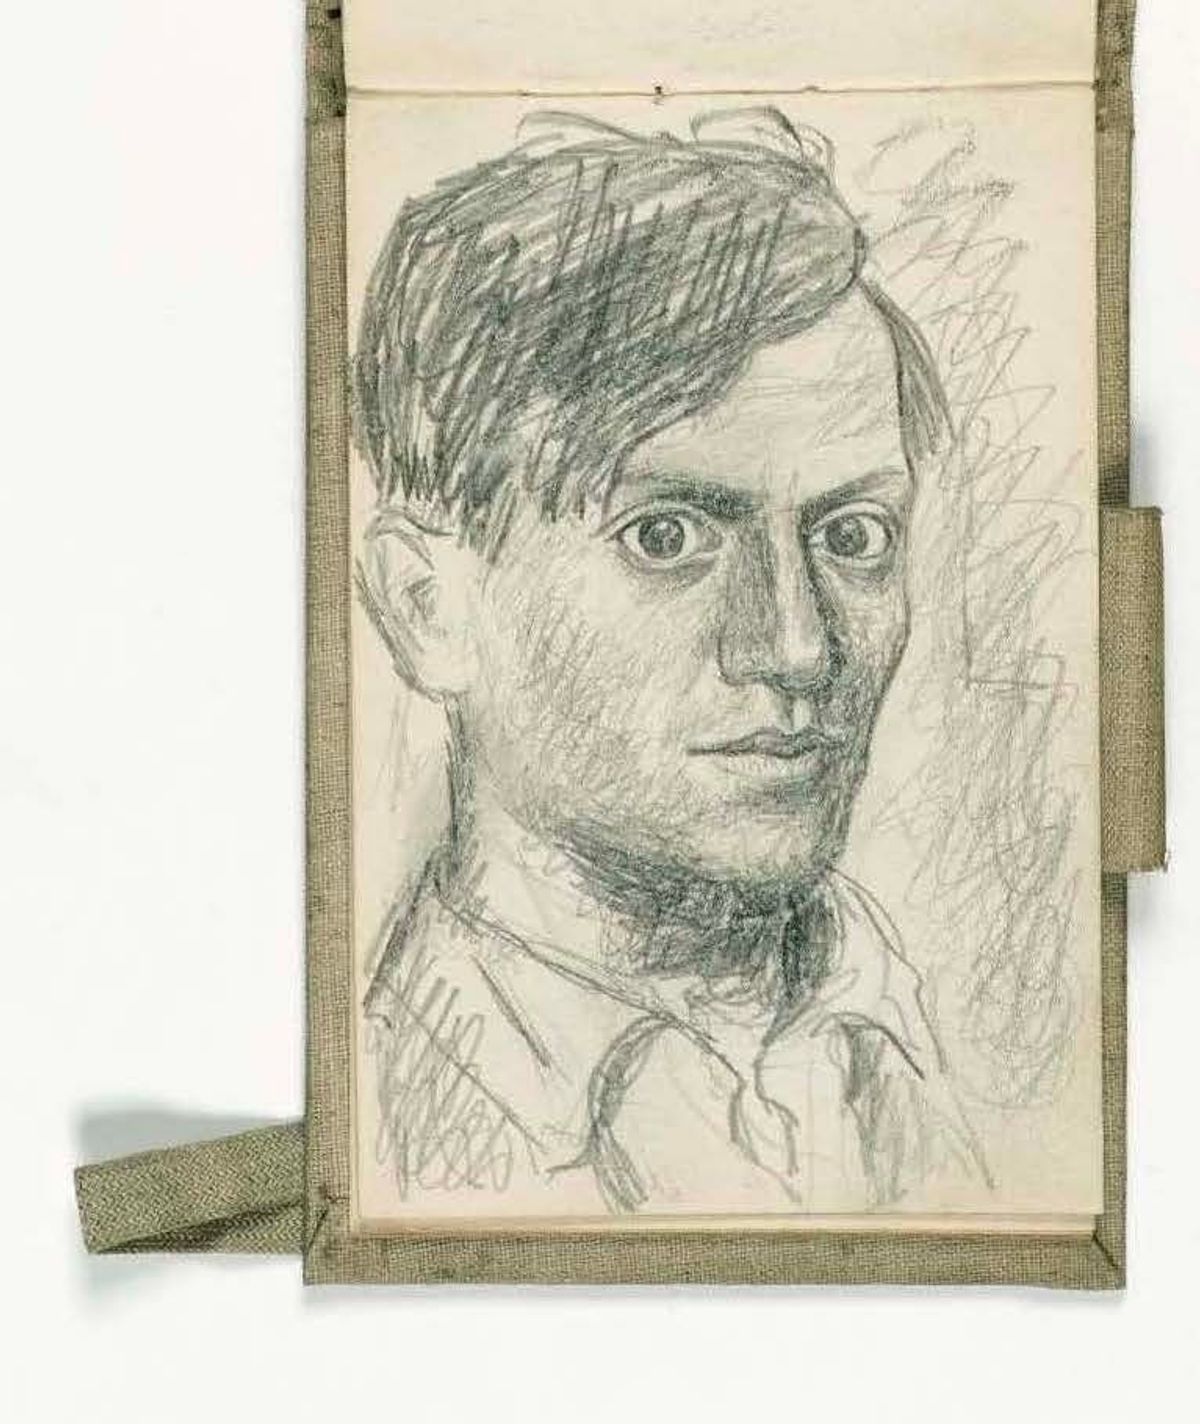 Pace gallery to show Picasso's sketchbooks in New York for 50 year  anniversary of artist's death